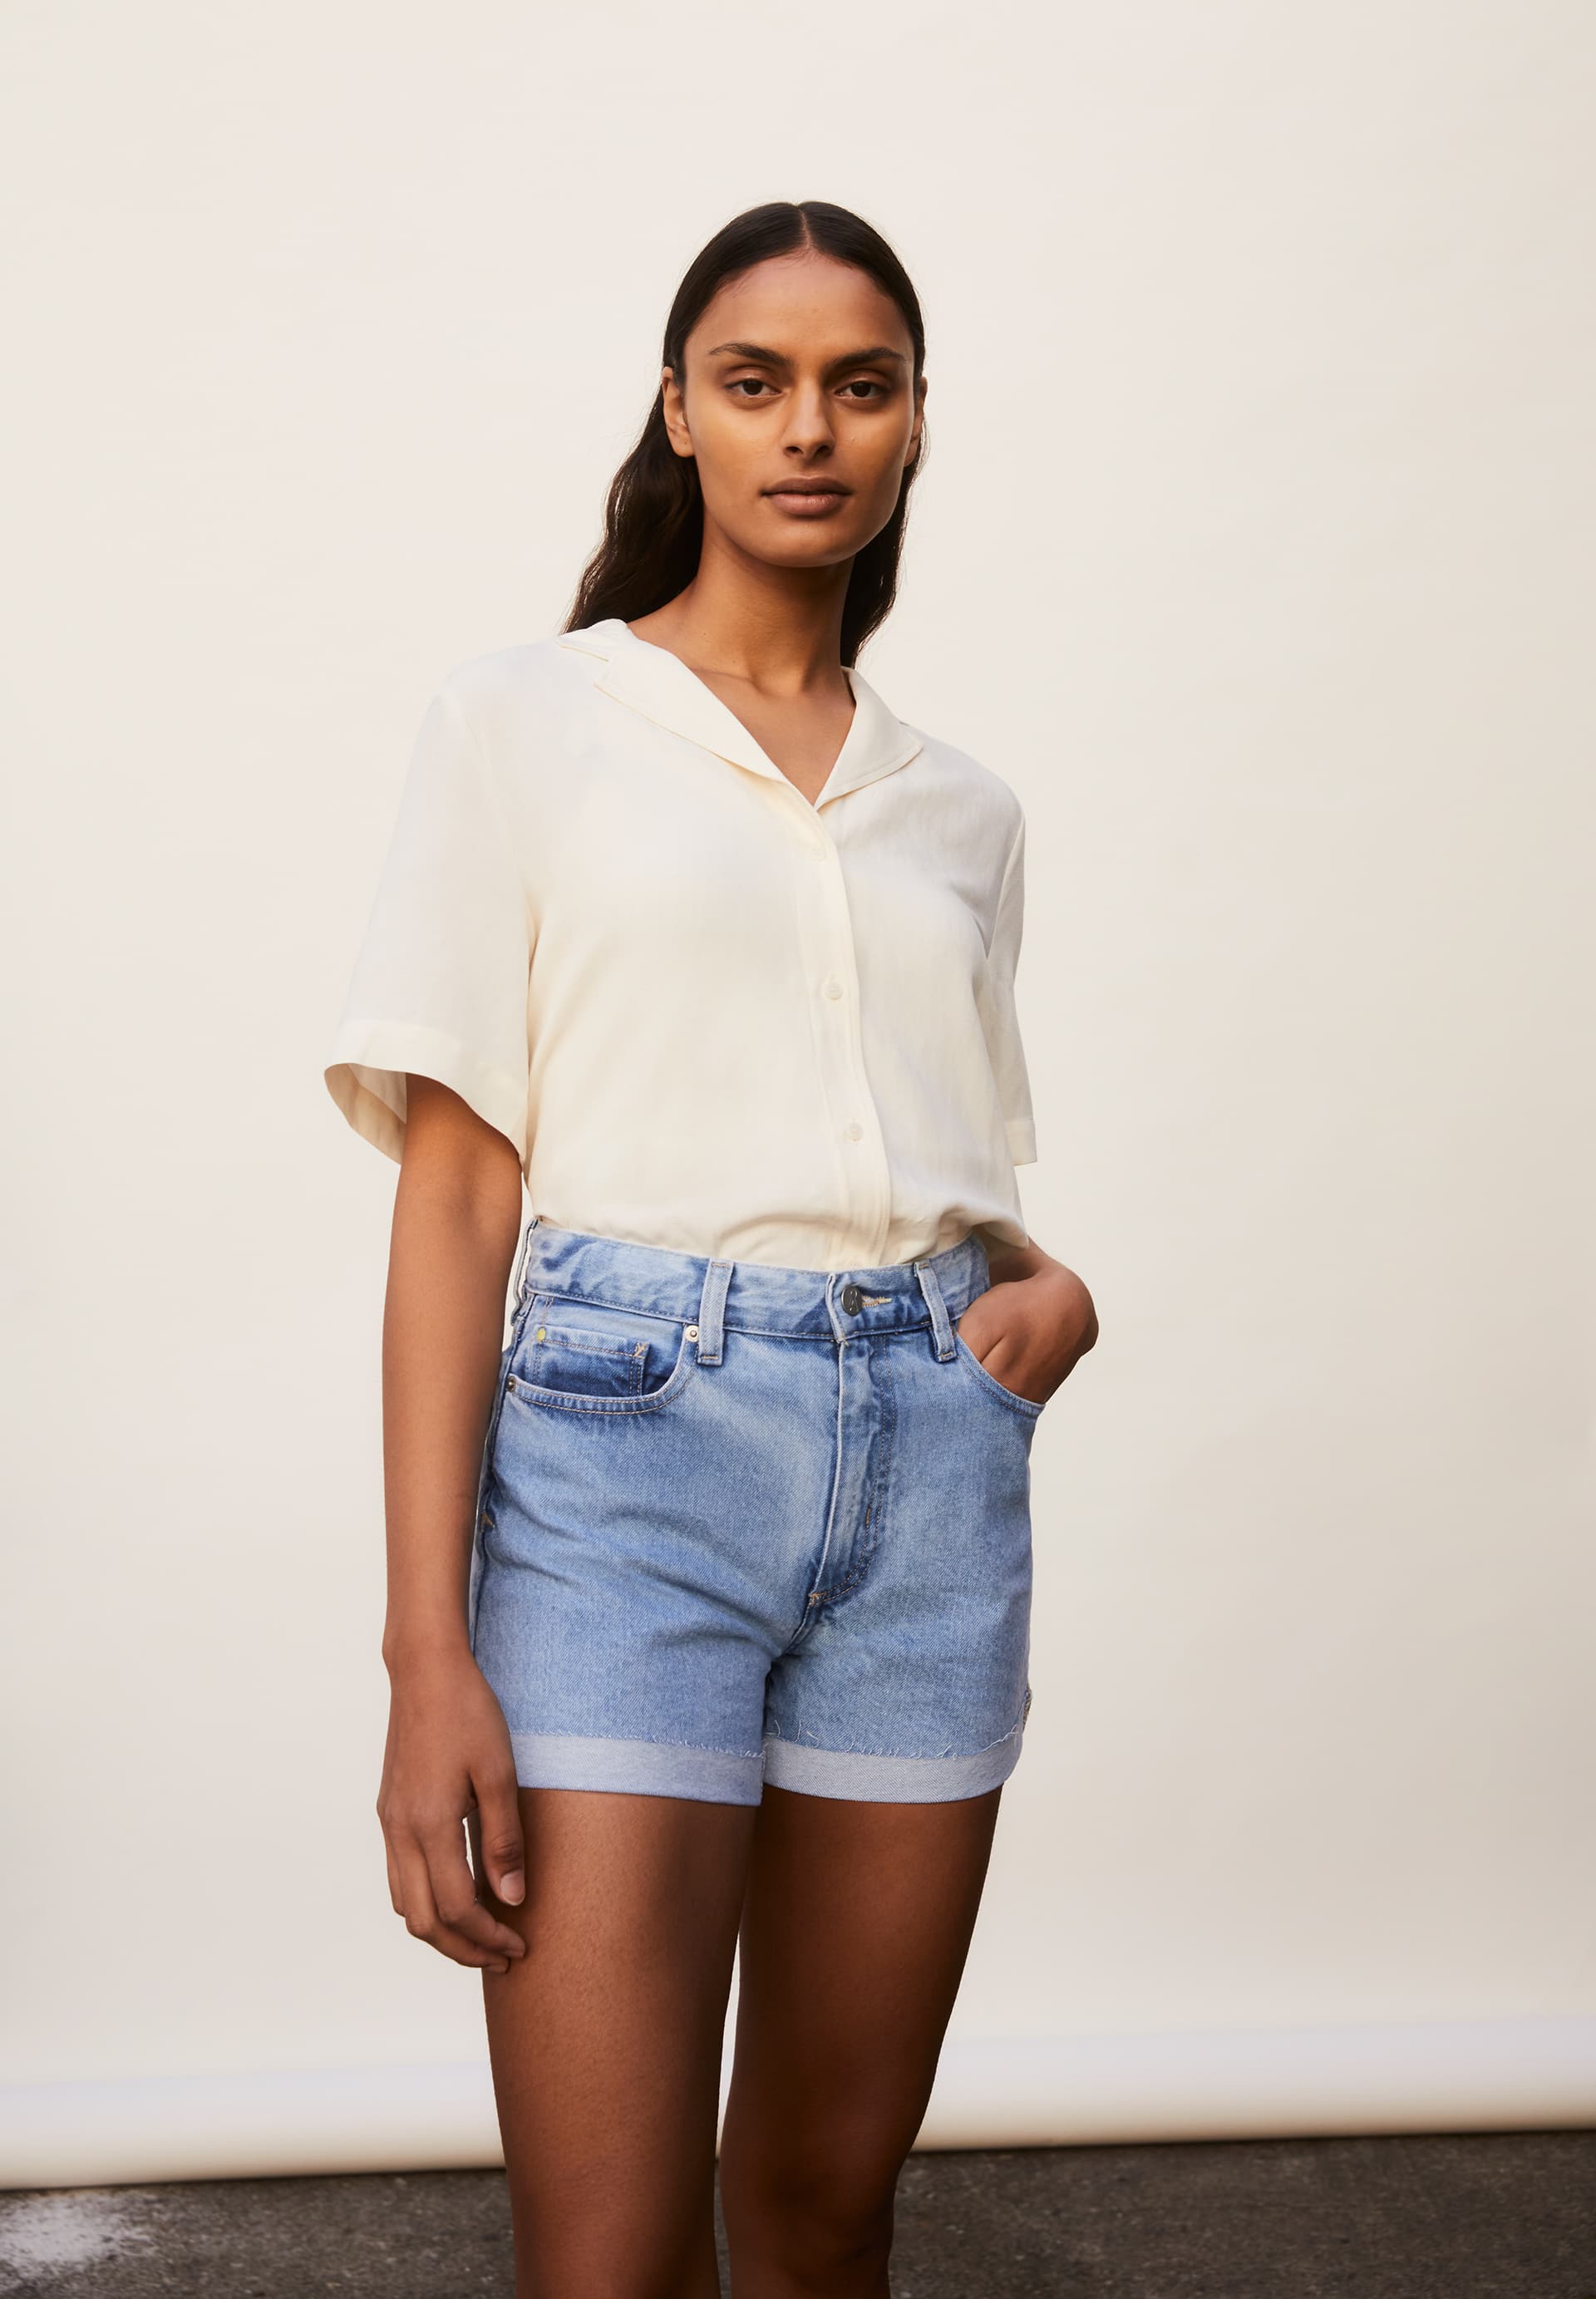 LEMEAA TURN Denim Shorts made of recycled Cotton Mix